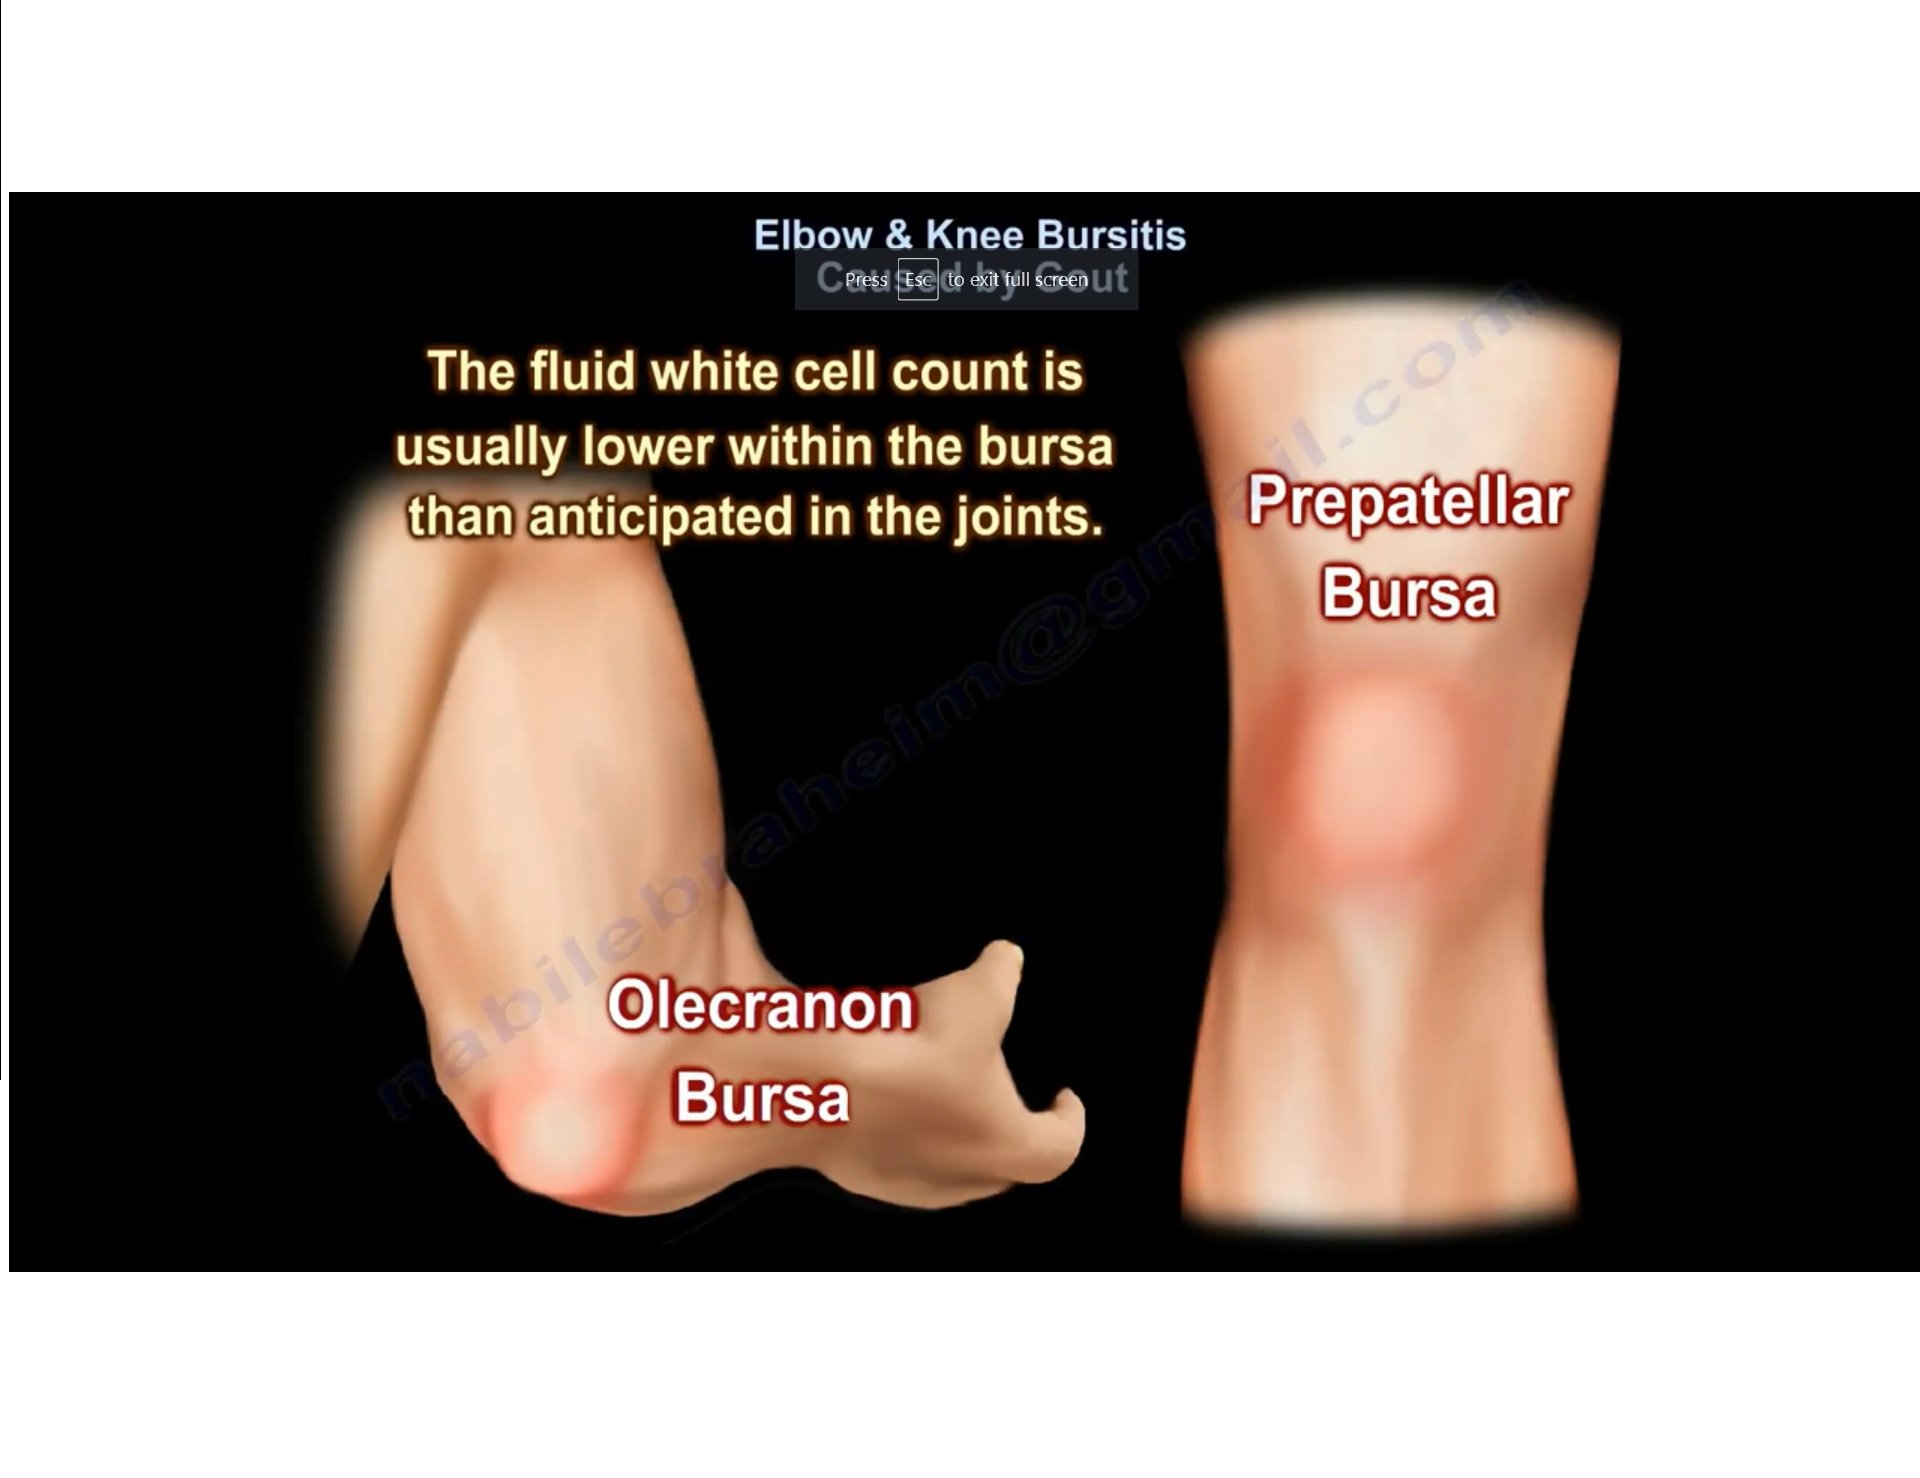 Elbow and Knee Bursitis caused by Gout ...